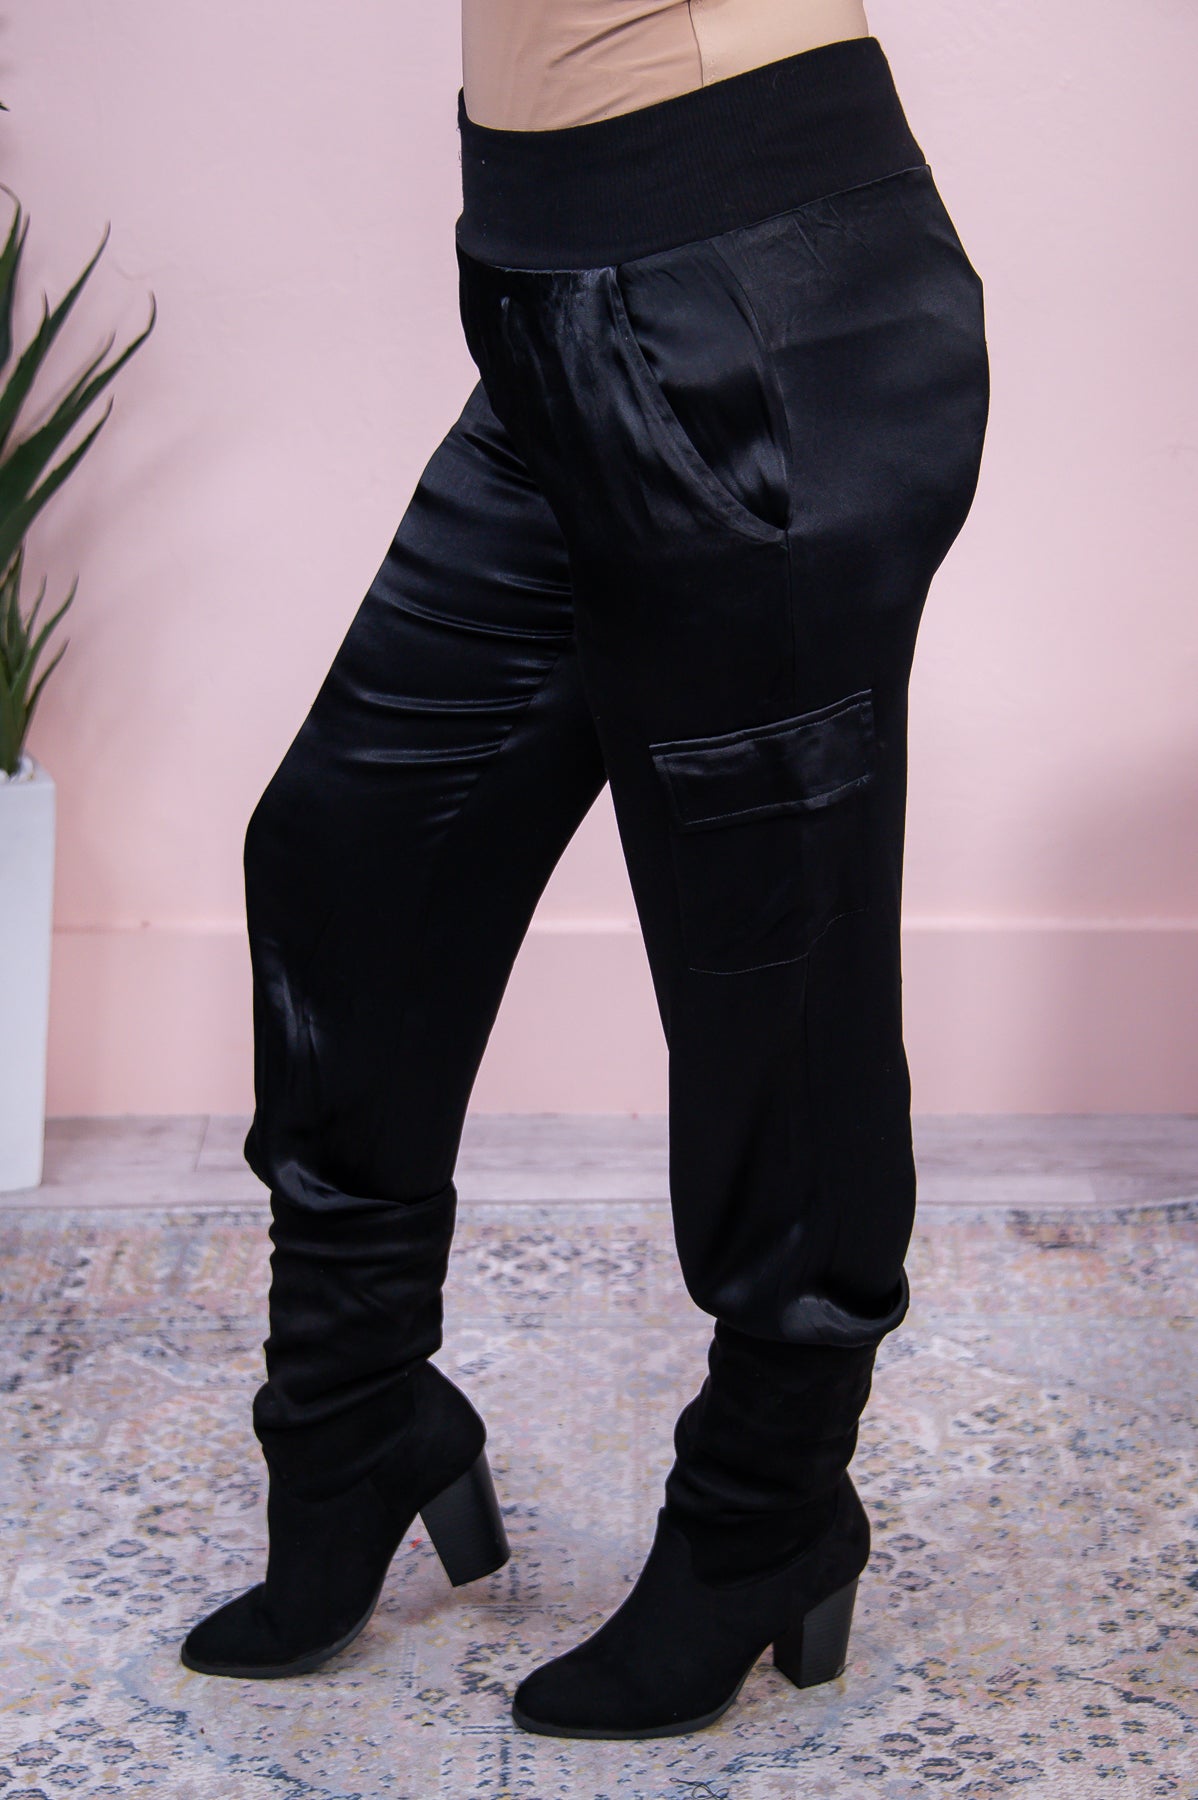 All About Attention Black Solid Top/Pant (2-Piece Set) - T8532BK